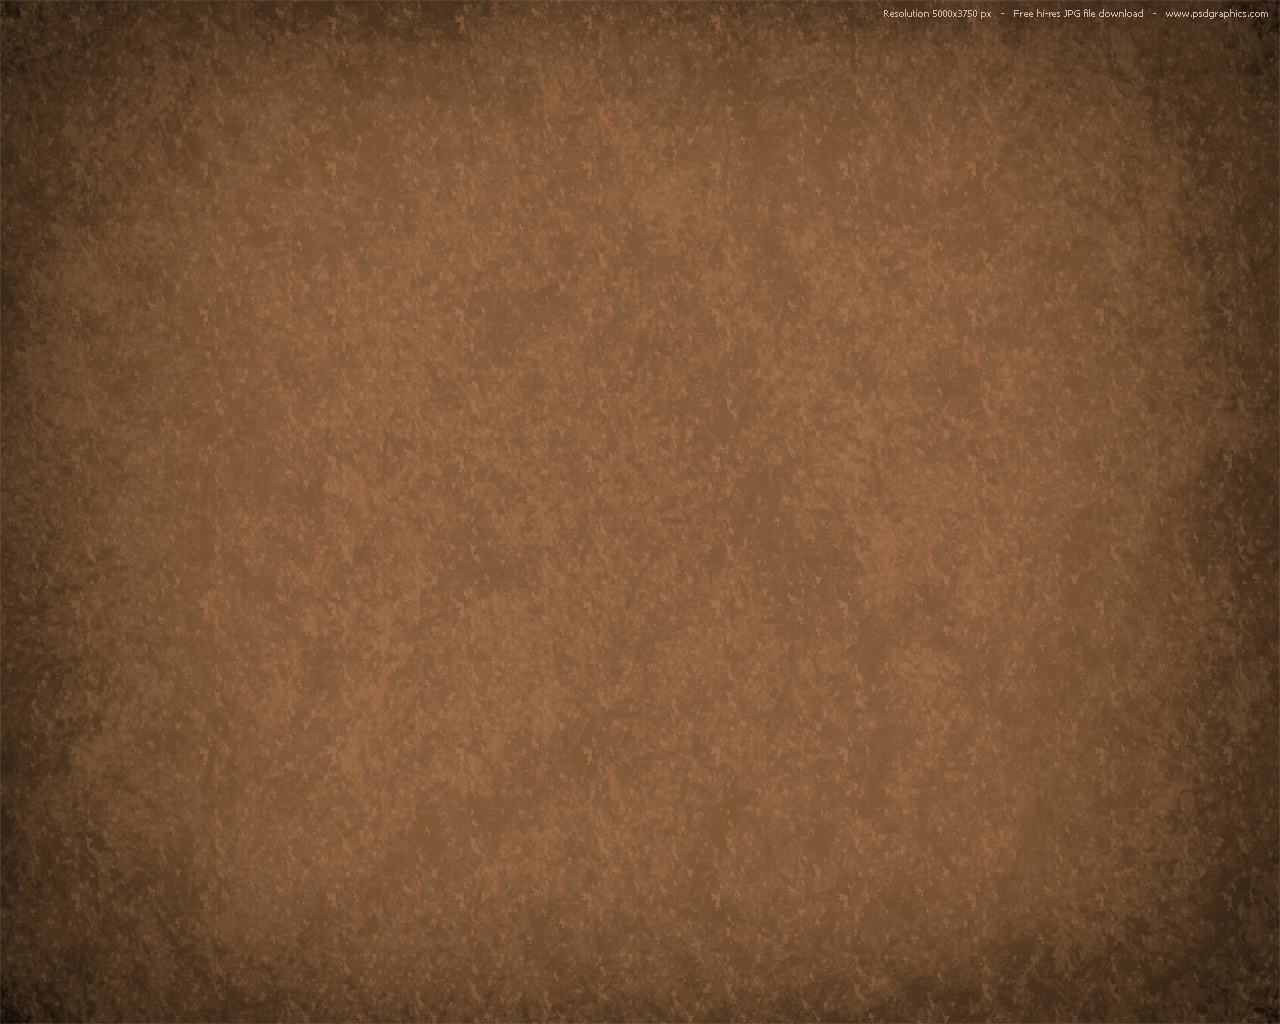 Red and brown grunge backgrounds PSDGraphics